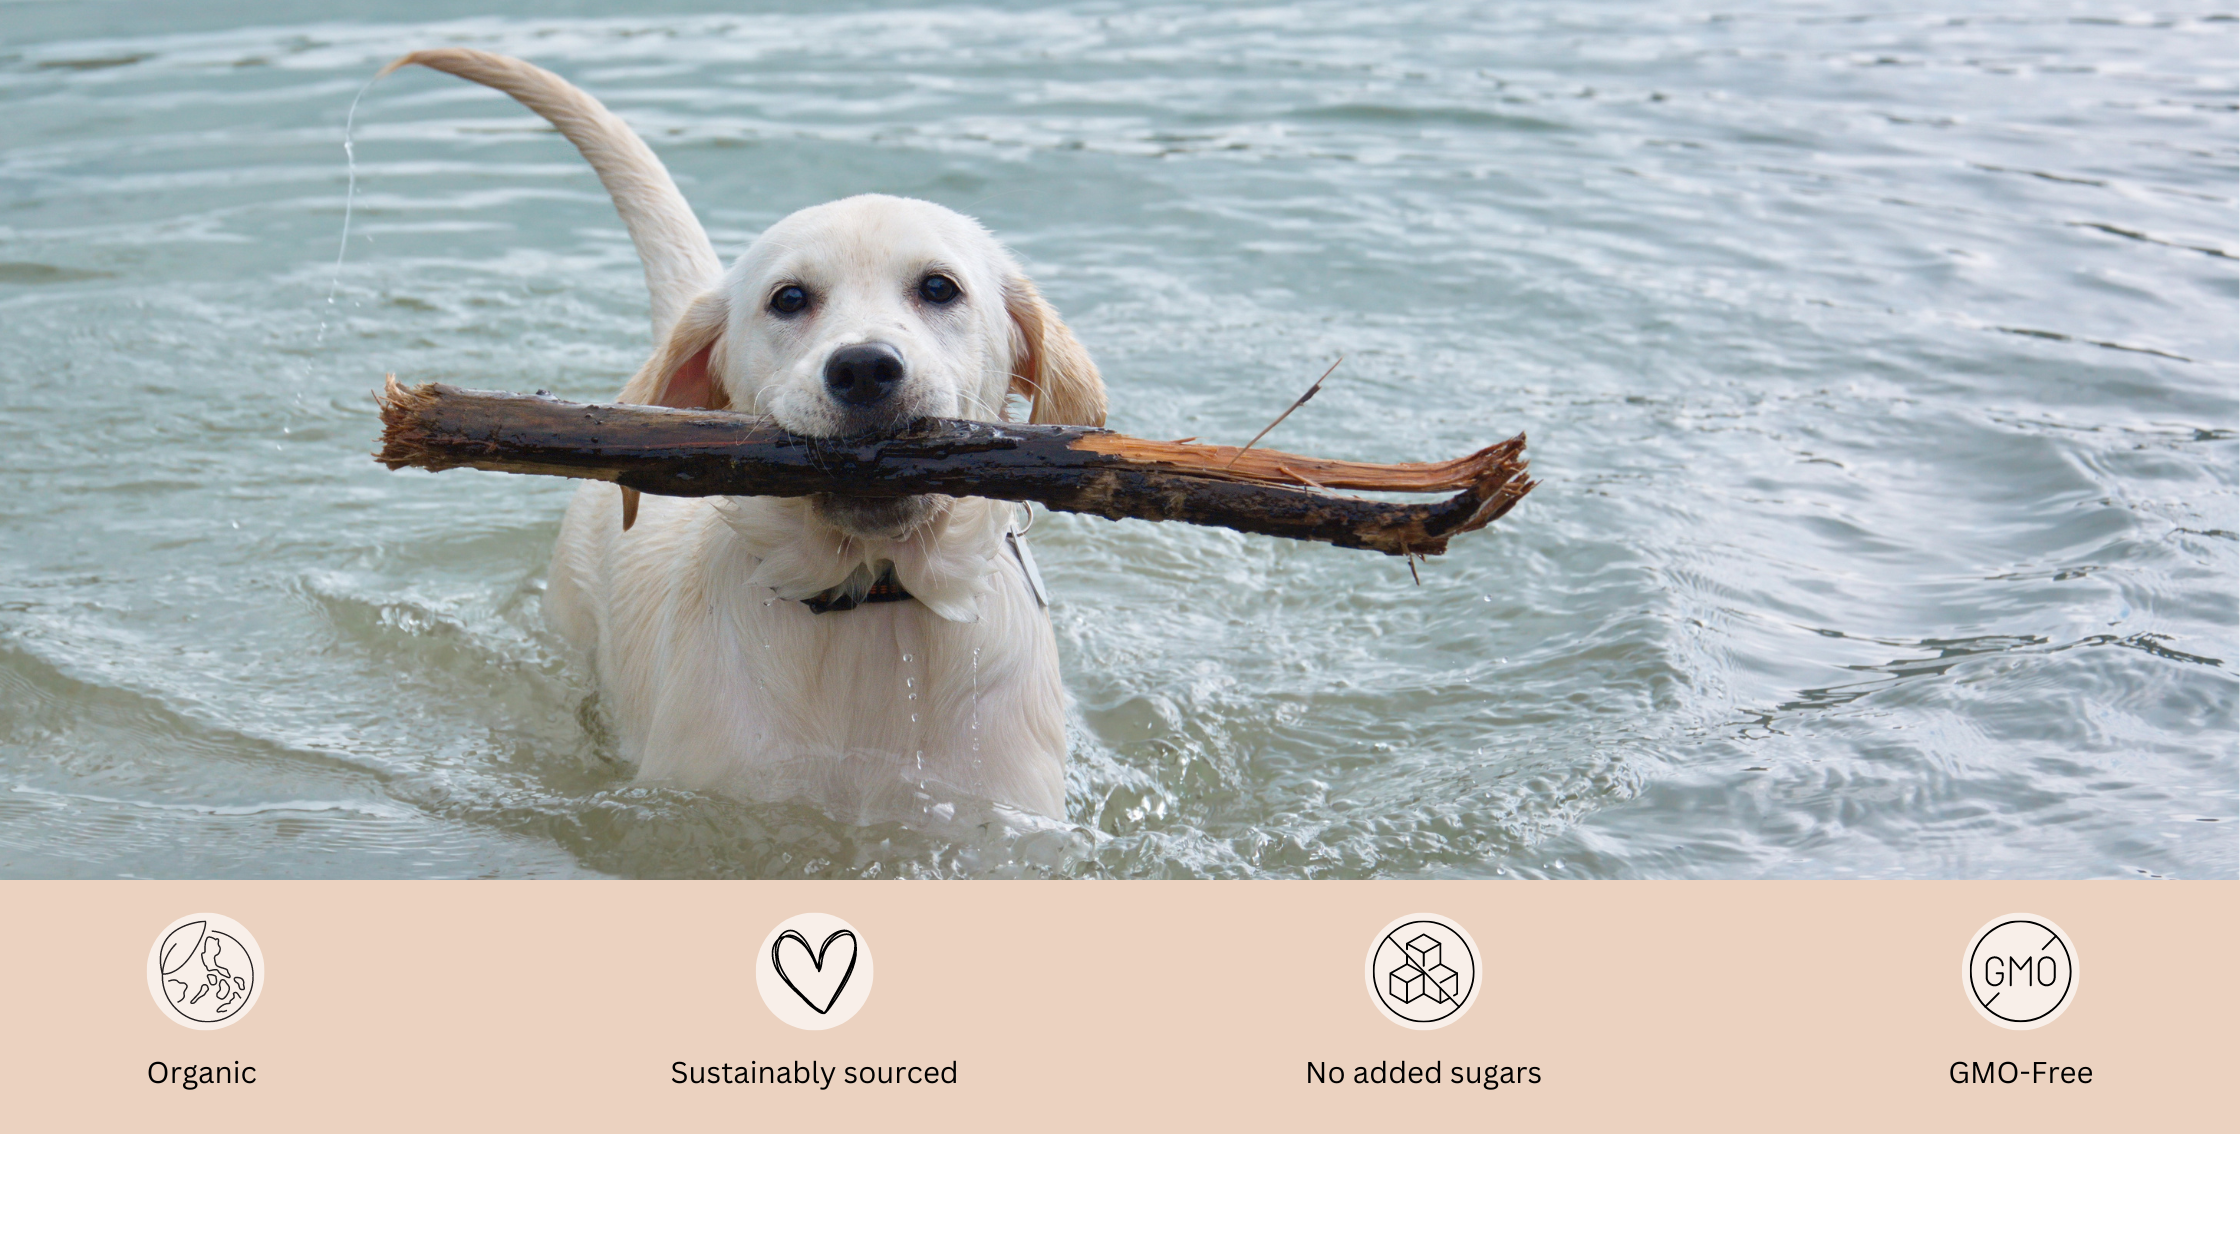 Active dog enjoying a playful swim in the water, holding a stick in its mouth, relishing the aquatic fun.